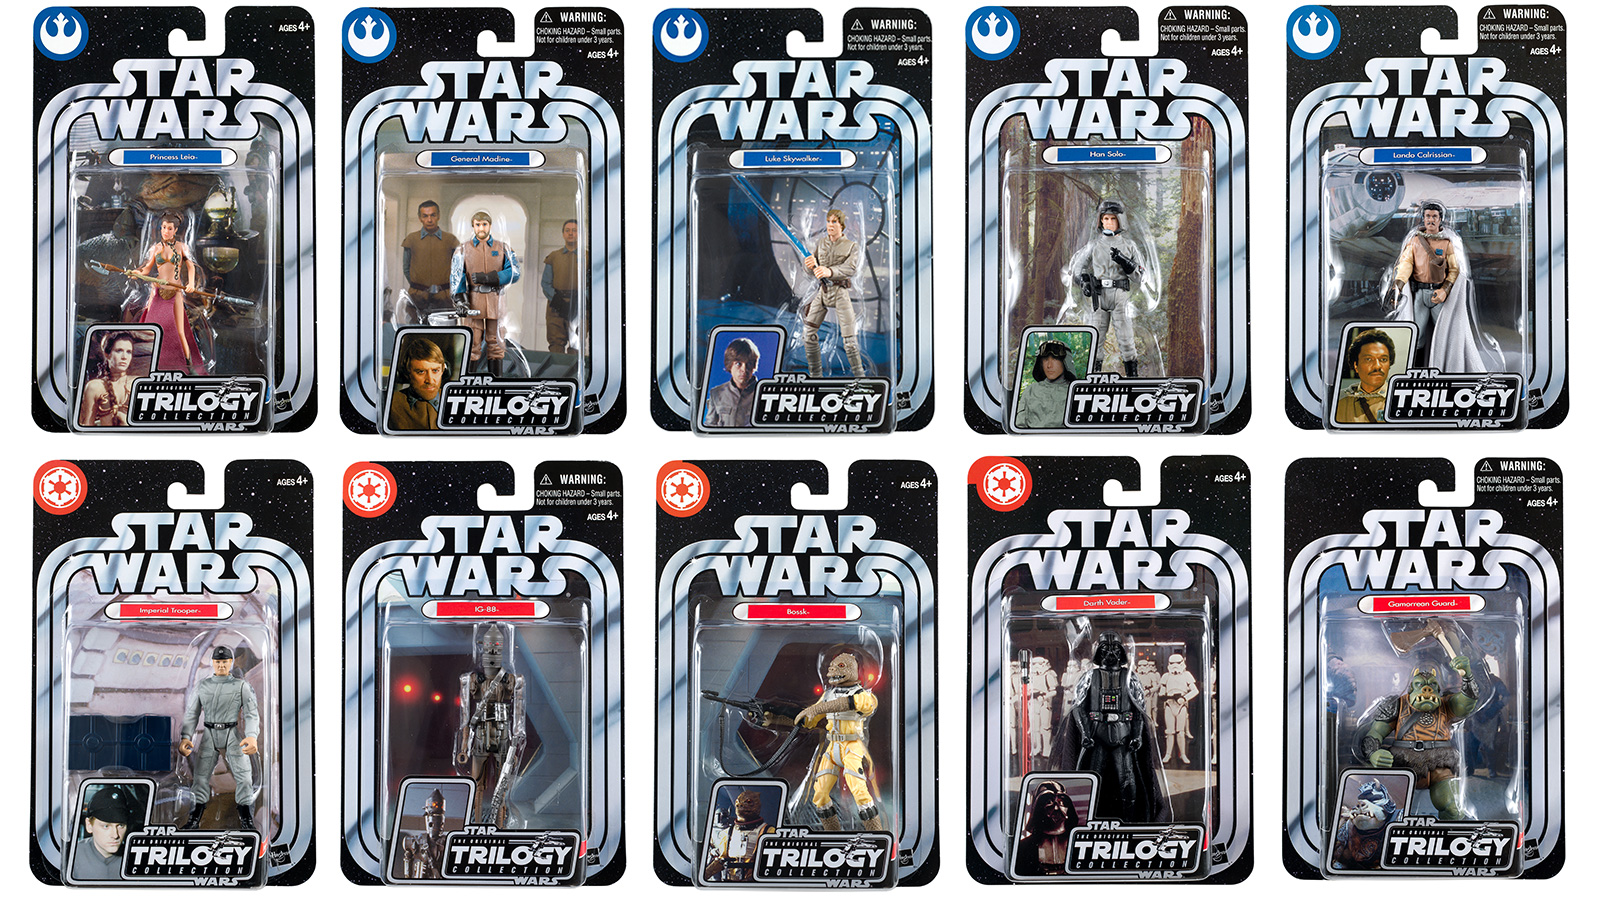 Photo Gallery Update - The Original Trilogy Collection Figures #20 - #38 Added